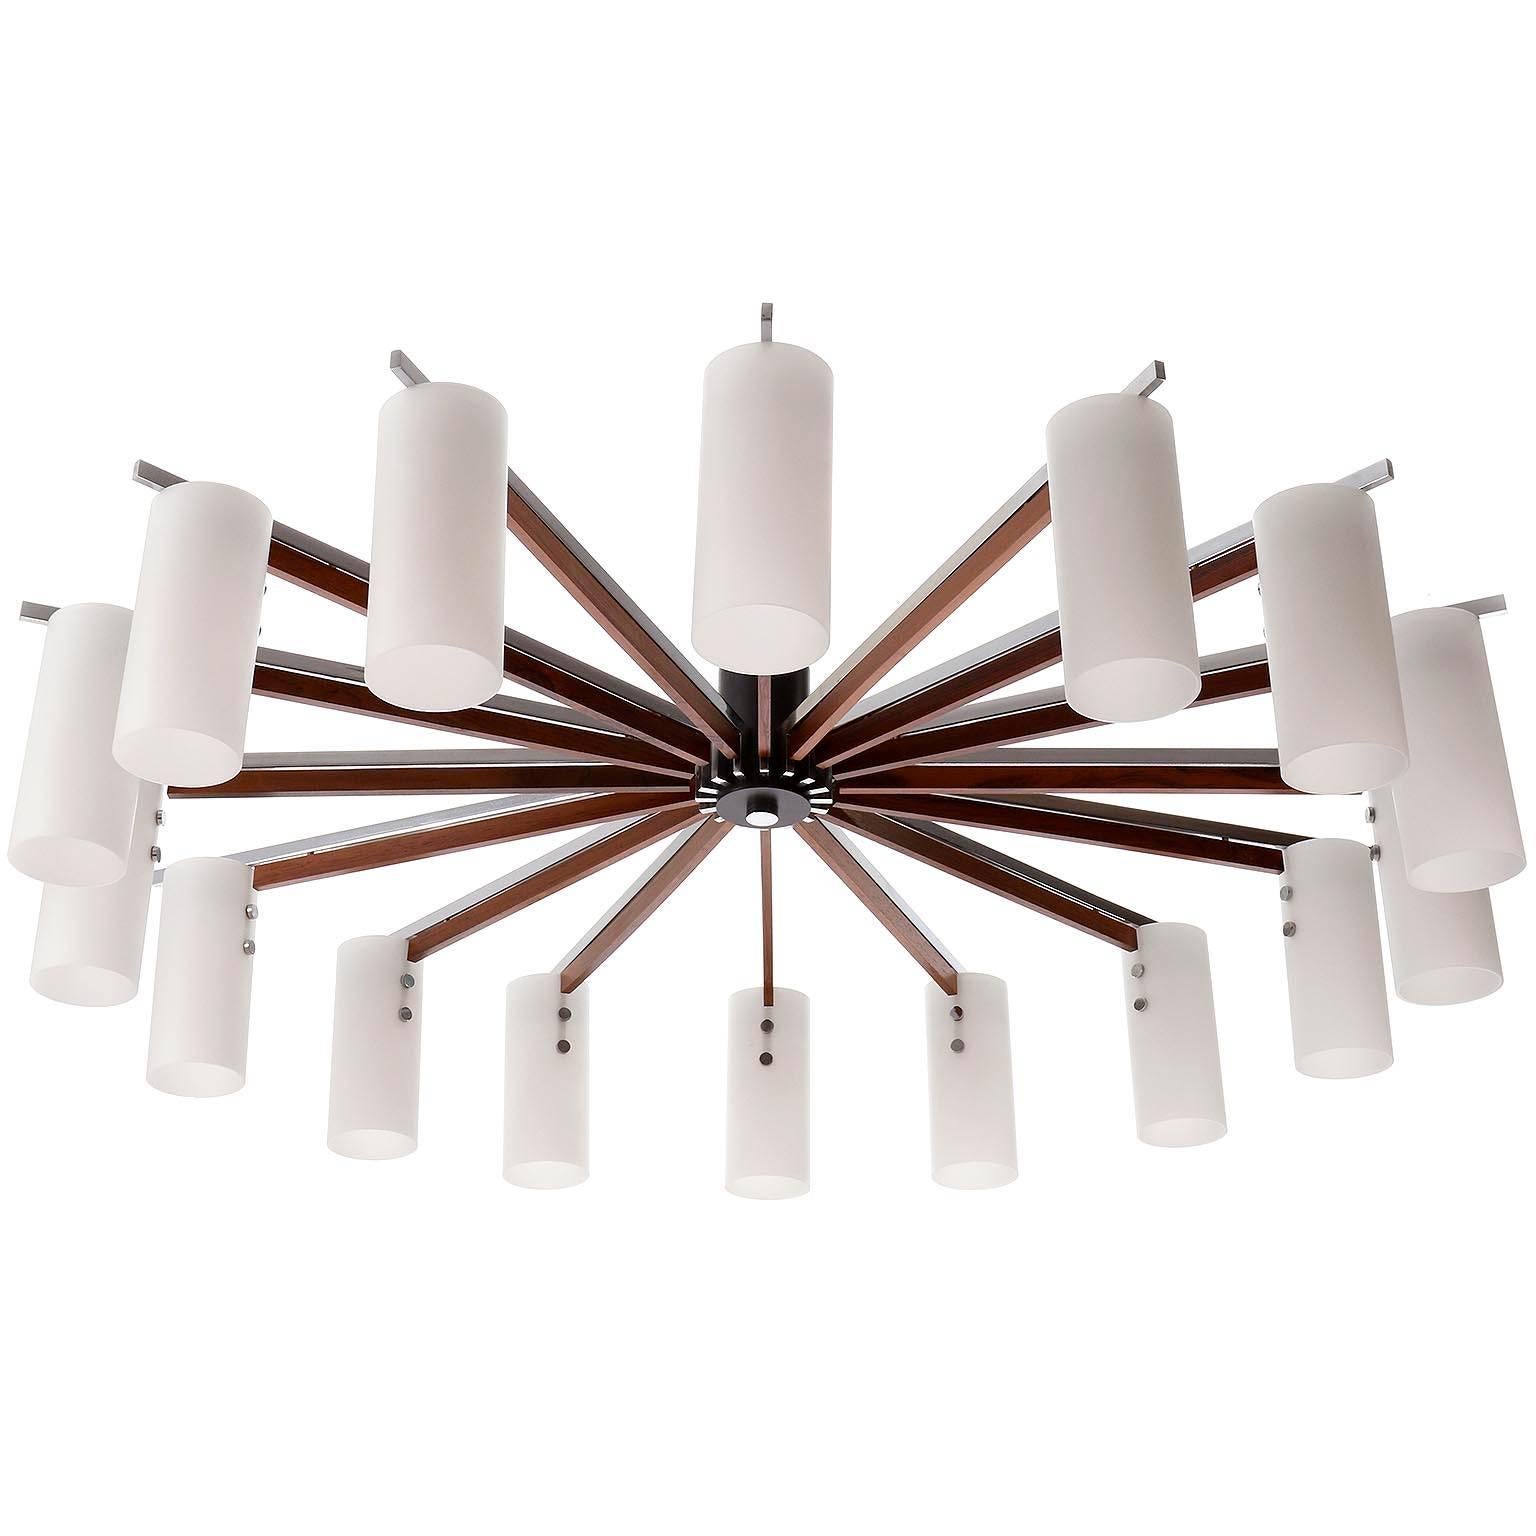 A very large sixteen-arm spider flush mount light chandelier by Rupert Nikoll, Austria, manufactured in midcentury, circa 1970 (late 1960s or early 1970s). The fixture is in excellent refurbished condition and ready to use.
There is a pair